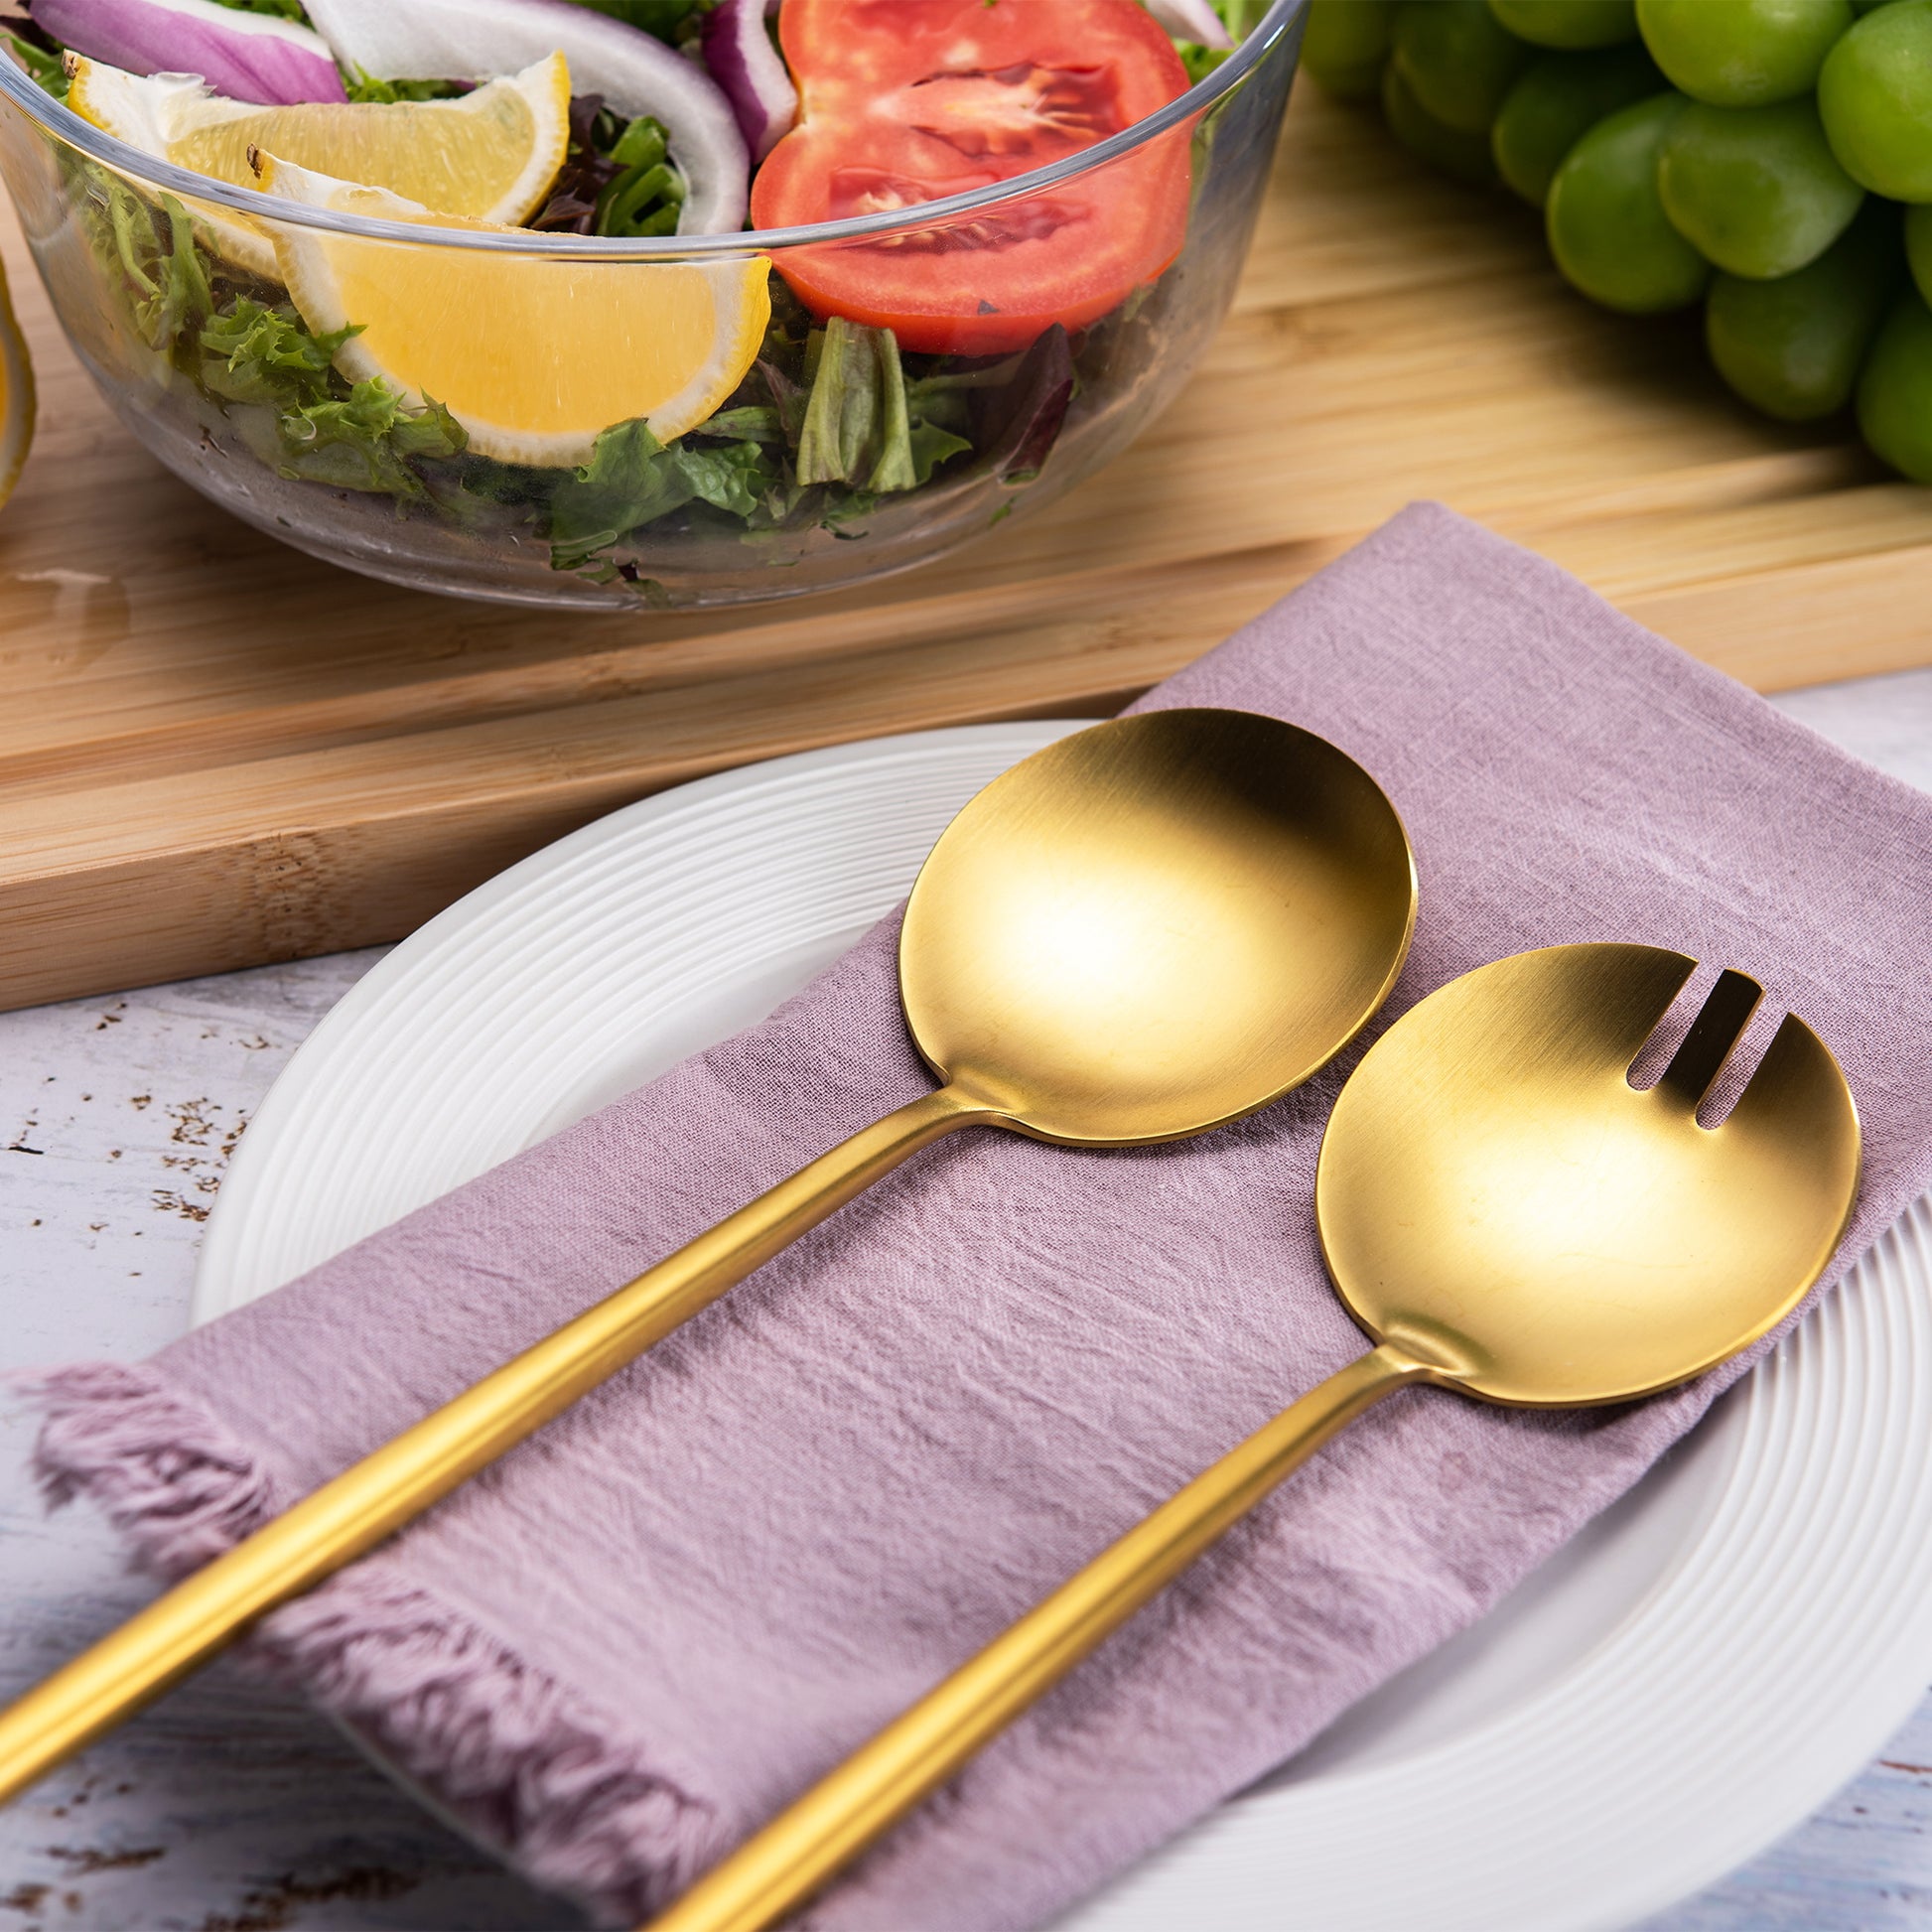 Matte Gold Serving Spoons And Forks Serving Utensils Set Silverware Cake Cutter comically large spoon set cake cutting pie server salad serving utensil set pasta tosser tongs modern dinnerware set dinnerwear gifts kitchen gadgets new home essentials must have apartment house warming gifts basket party thanksgiving hosting christmas party at home xmas birthday anniversary dinner couples night chic gatherings rustic